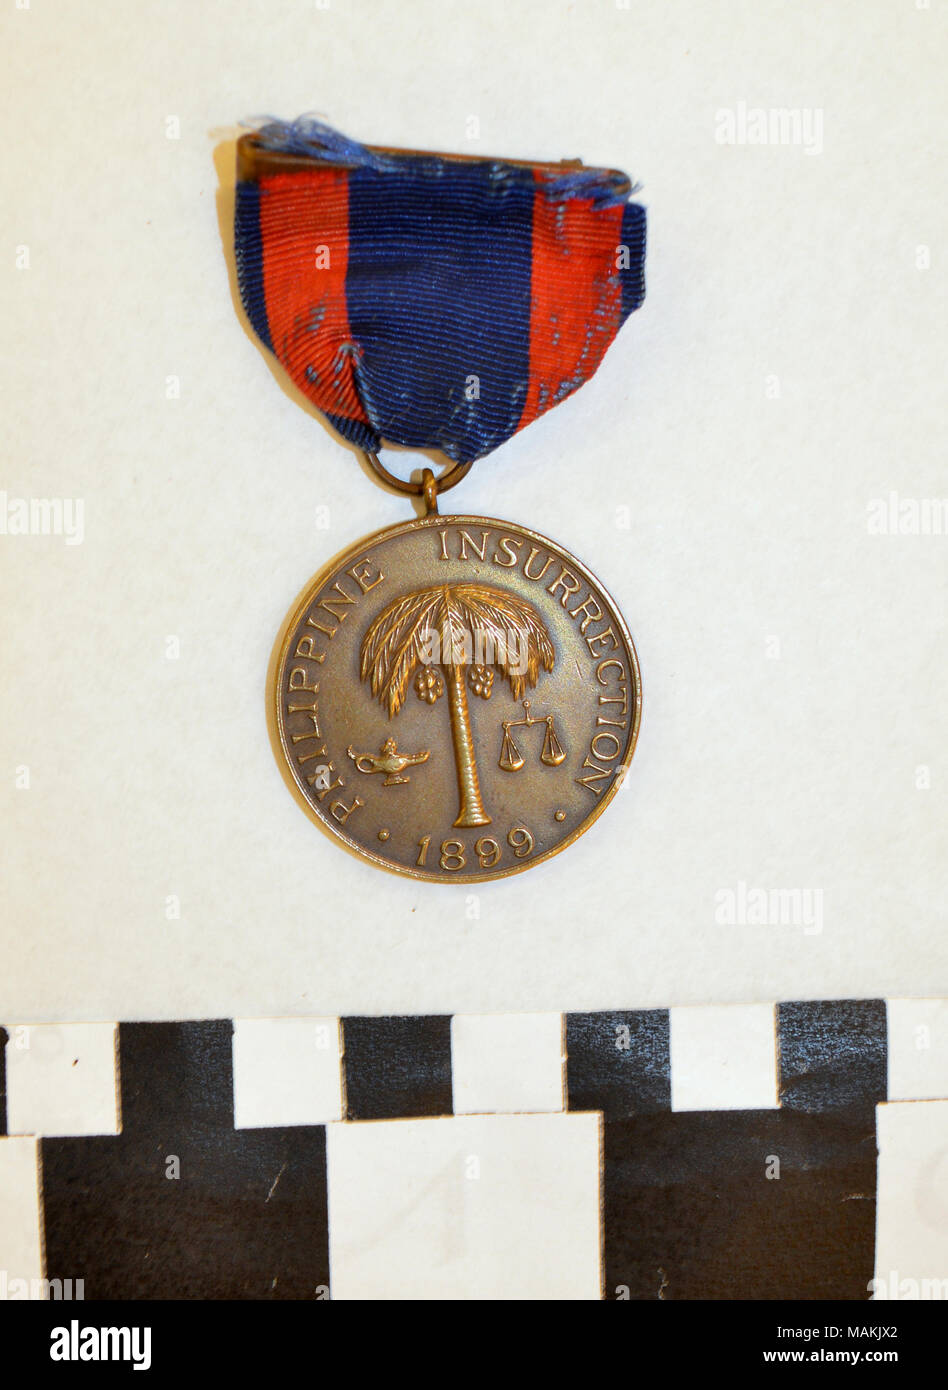 Bronze medal awarded for service in the Philippines during the Insurrection and actions in various parts of the islands through 1913. Title: Phillipine Insurrection Medal Issued to Frank M. Rumbold  . between 1905 and 1913. Stock Photo